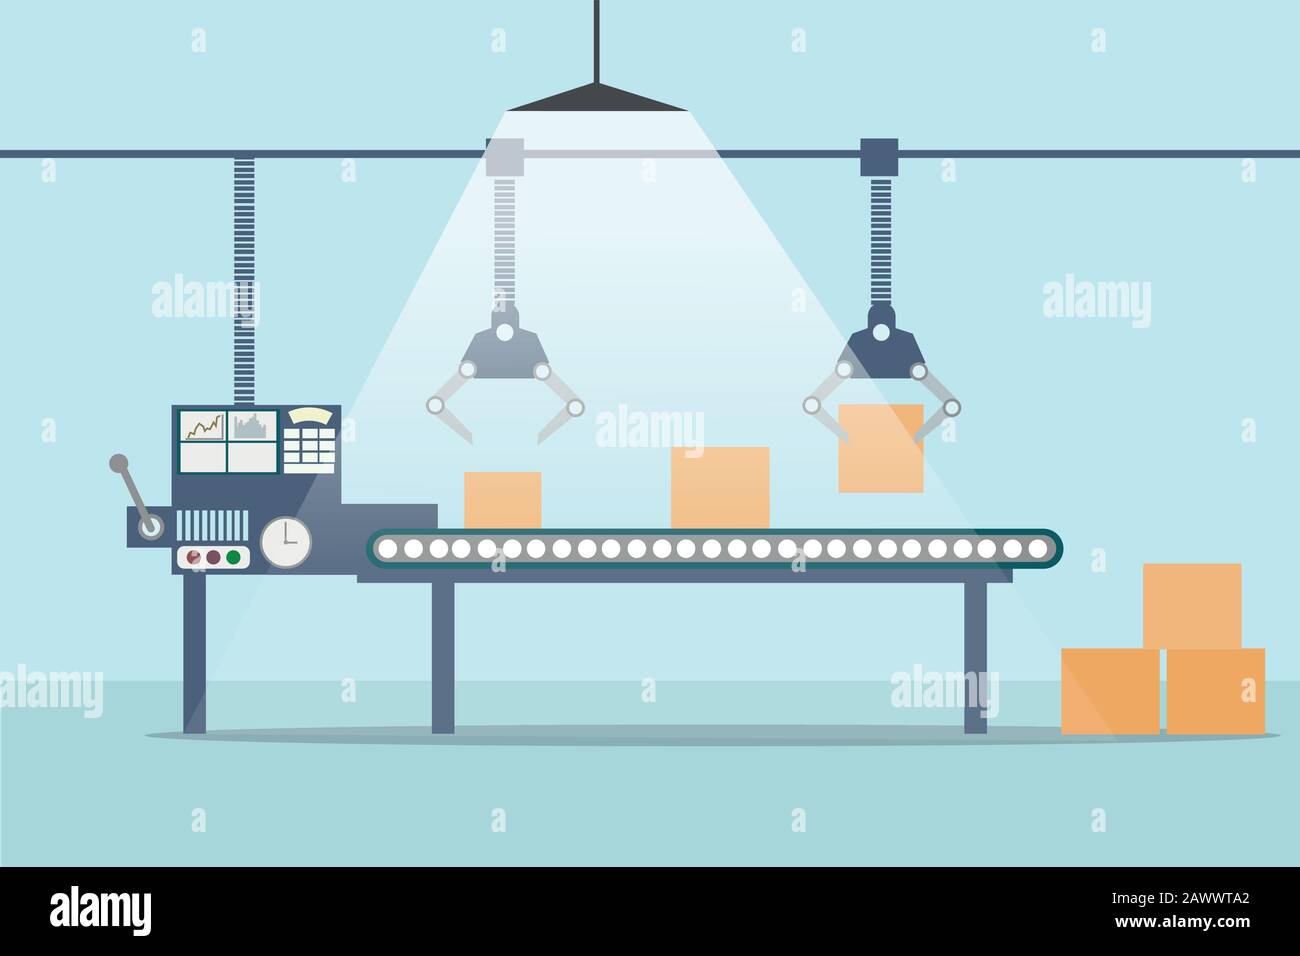 Production line of conveyor belt for industry Stock Vector